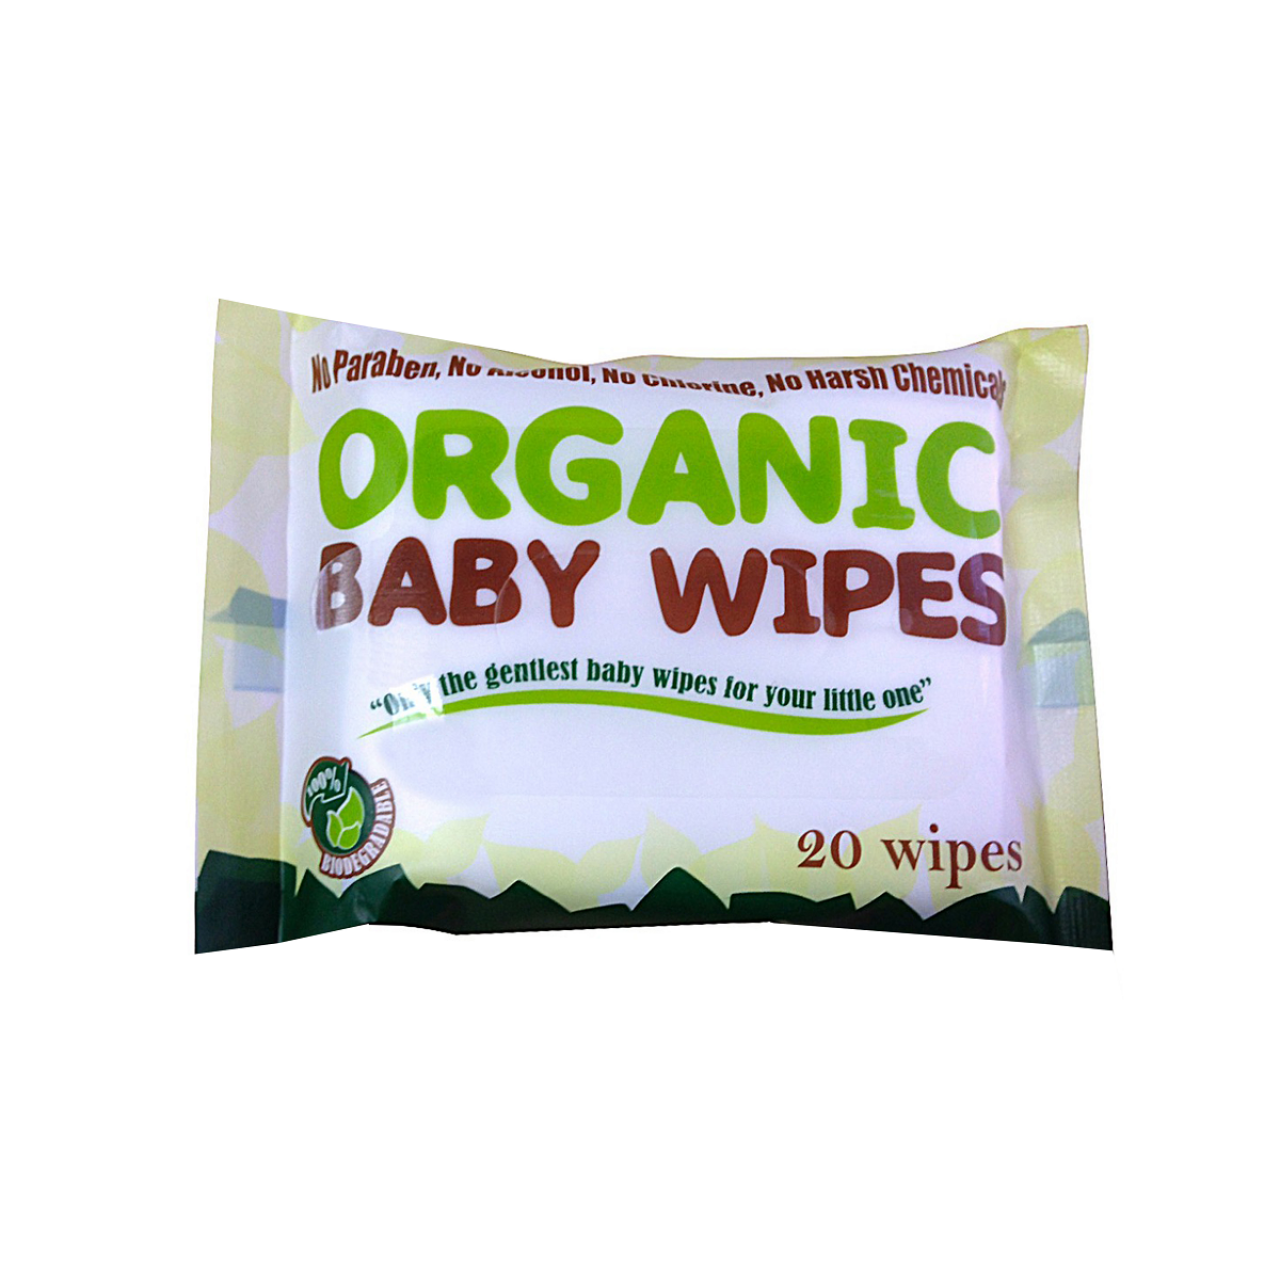 ORGANIC BABY WIPES 20 SHEETS